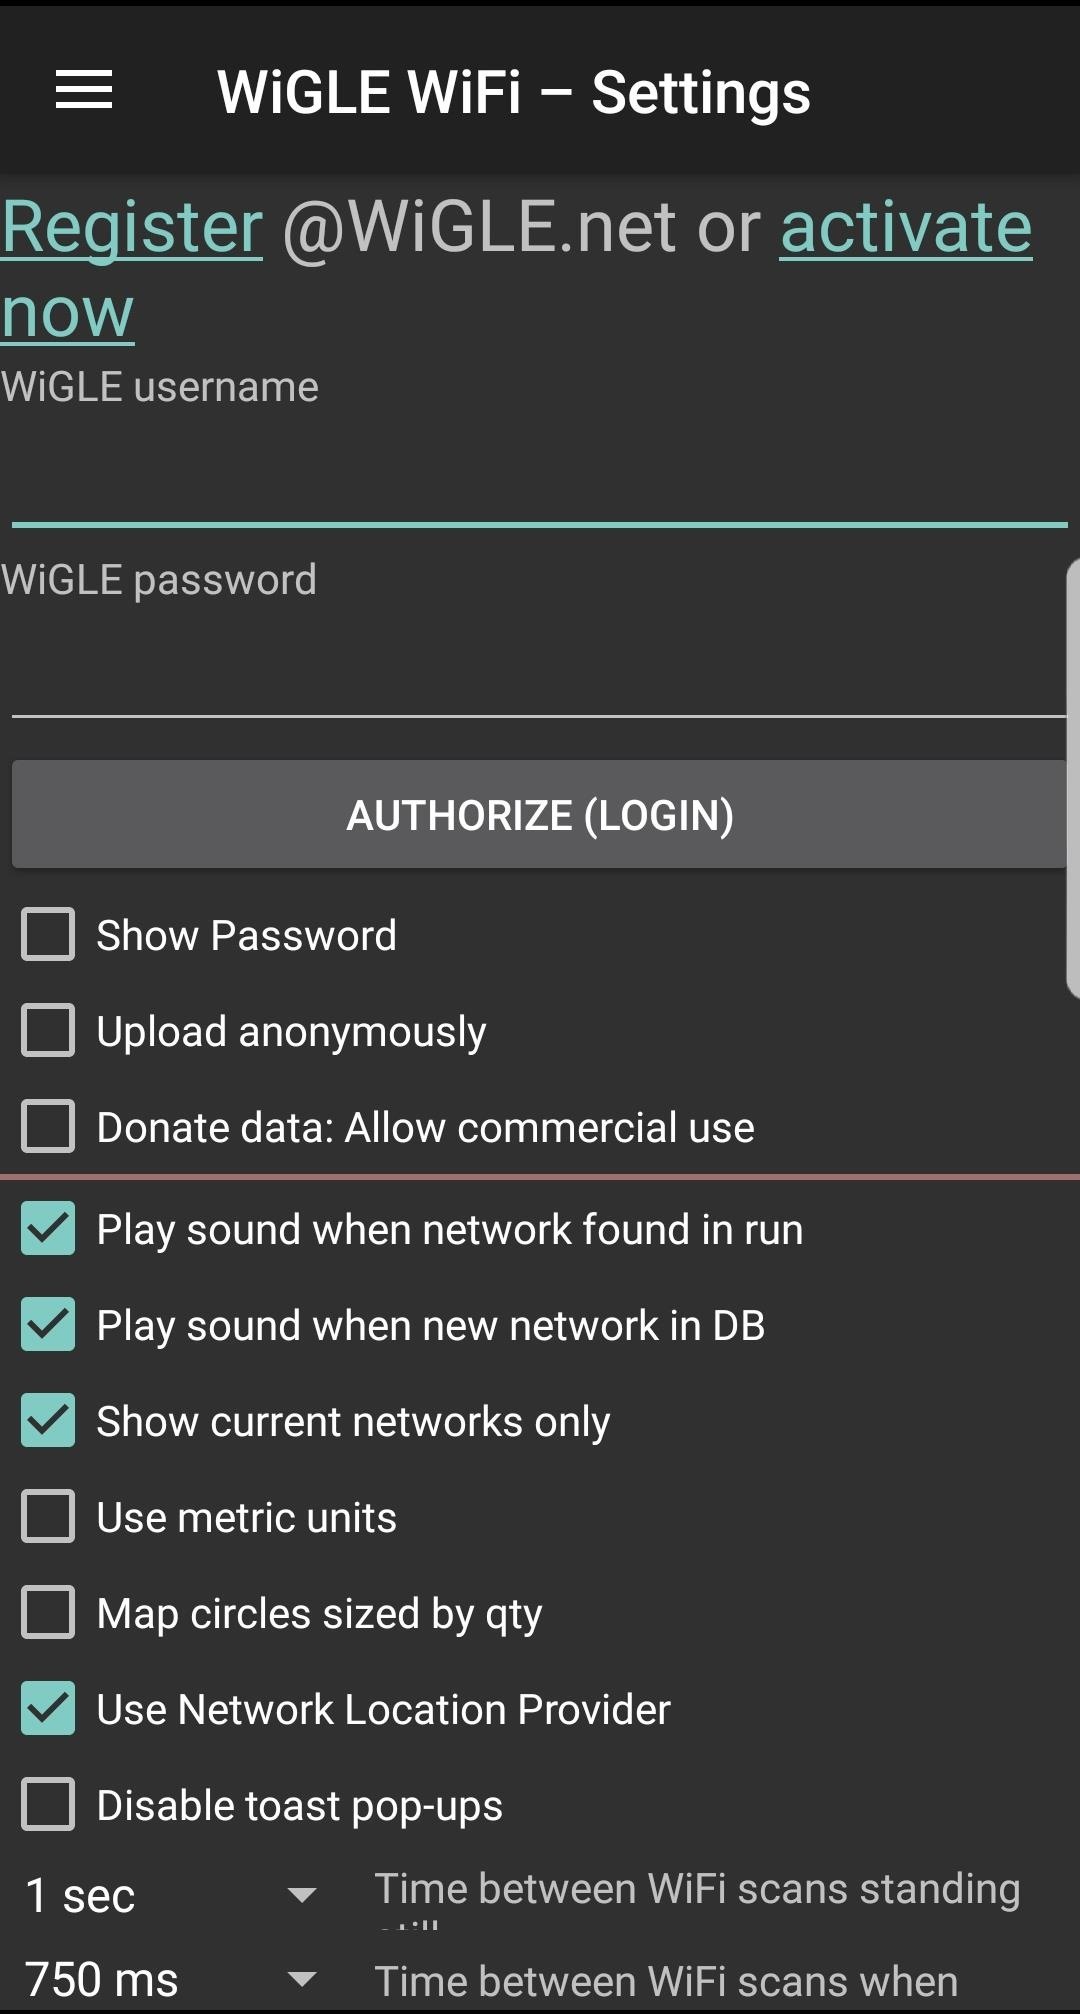 How to Wardrive on an Android Phone to Map Vulnerable Networks